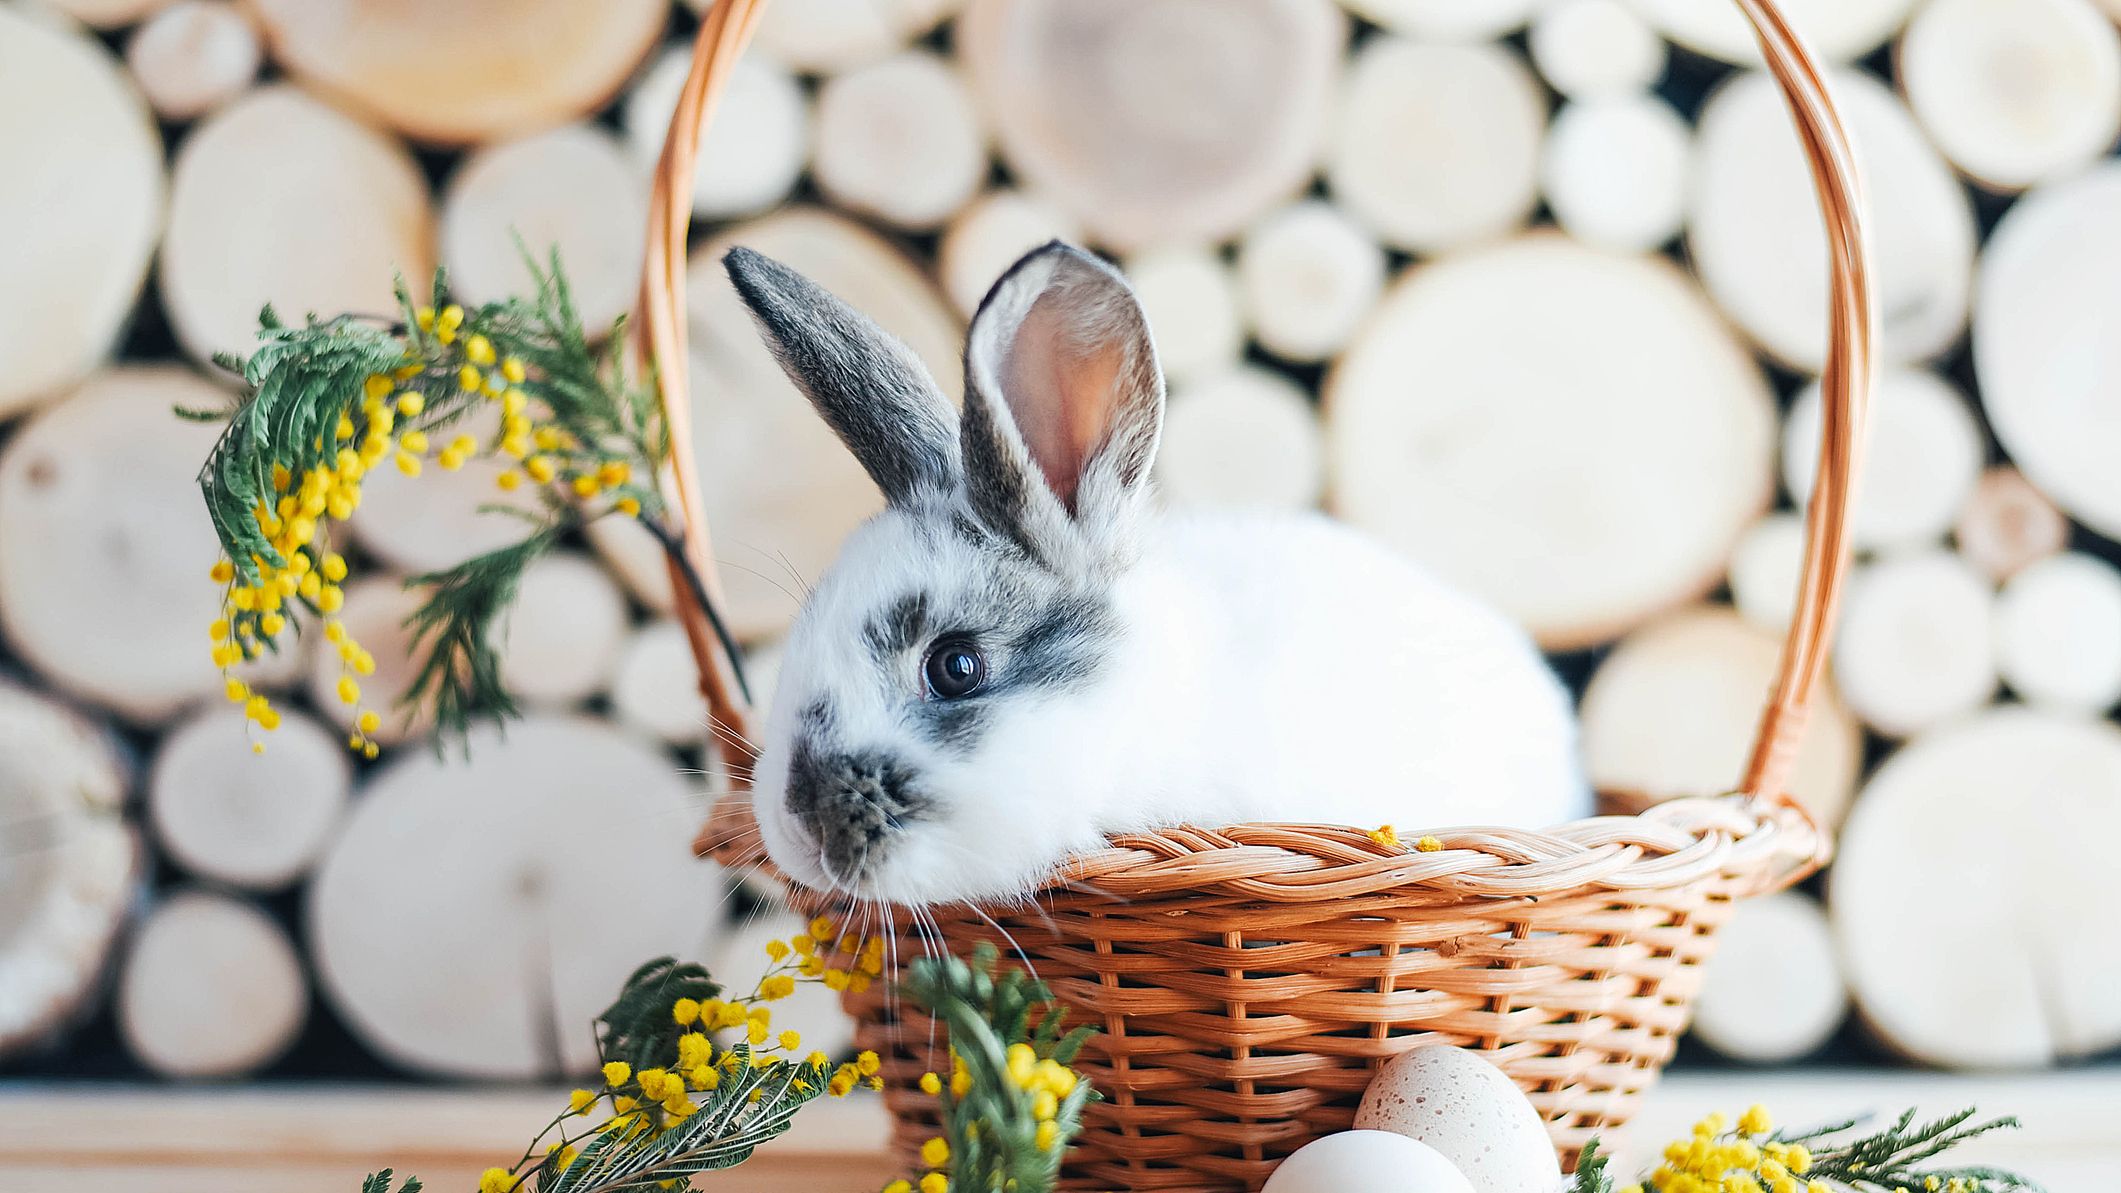 easter bunny with eggs wallpaper